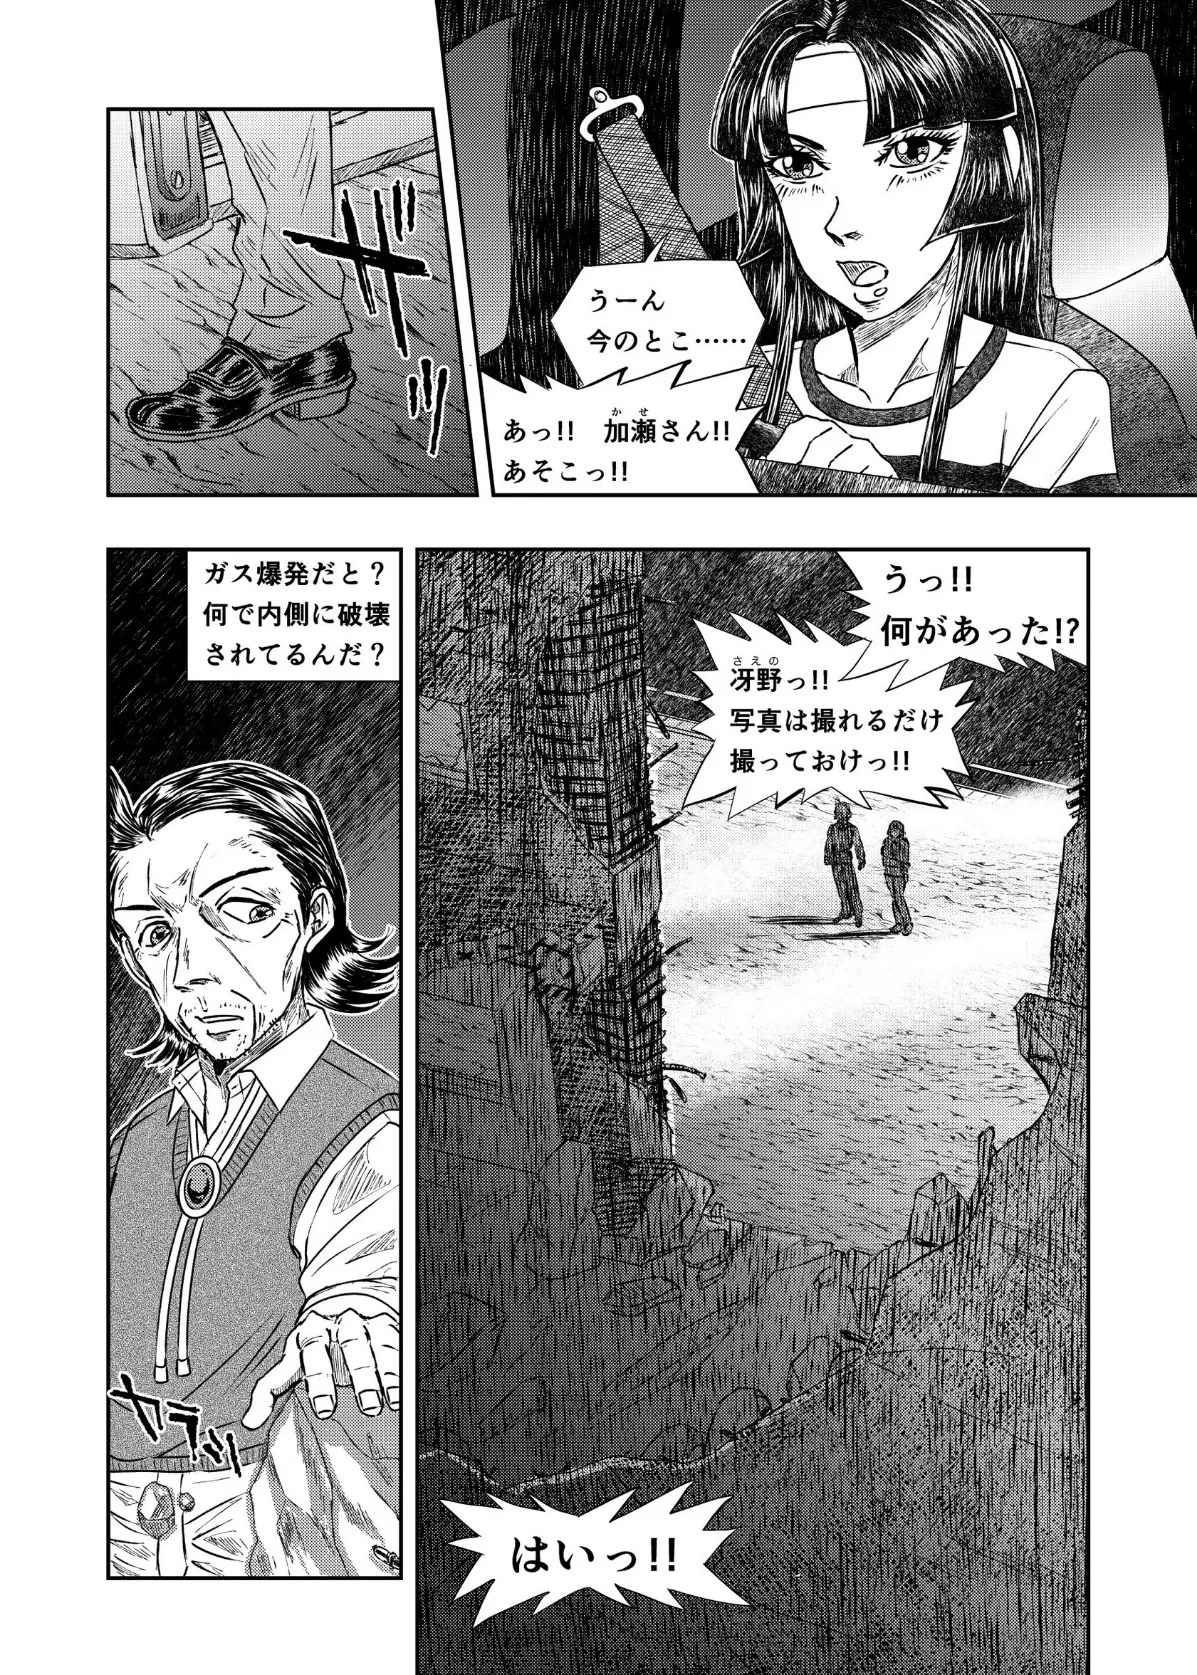 XENON REBOOT＜BASED STORY ON ’BIO DIVER XENON’＞【分冊版】 Chapter1 STRANGERS When We Meet（3） 14ページ